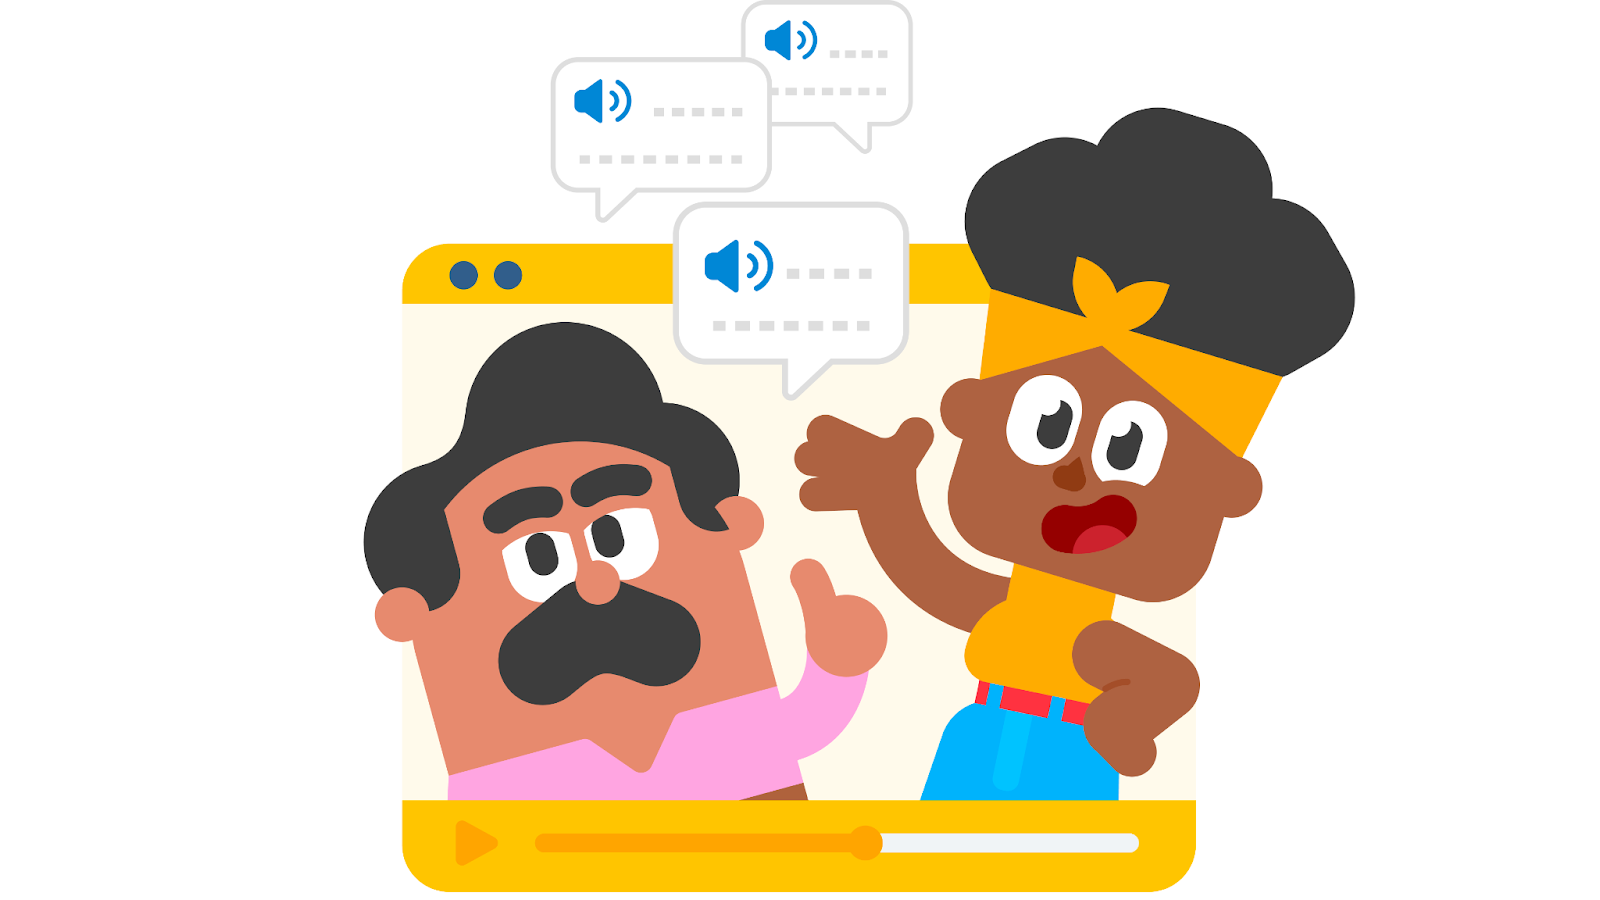 Duolingo characters Oscar and Bea popping out of a video chat screen with chat bubbles hovering between them